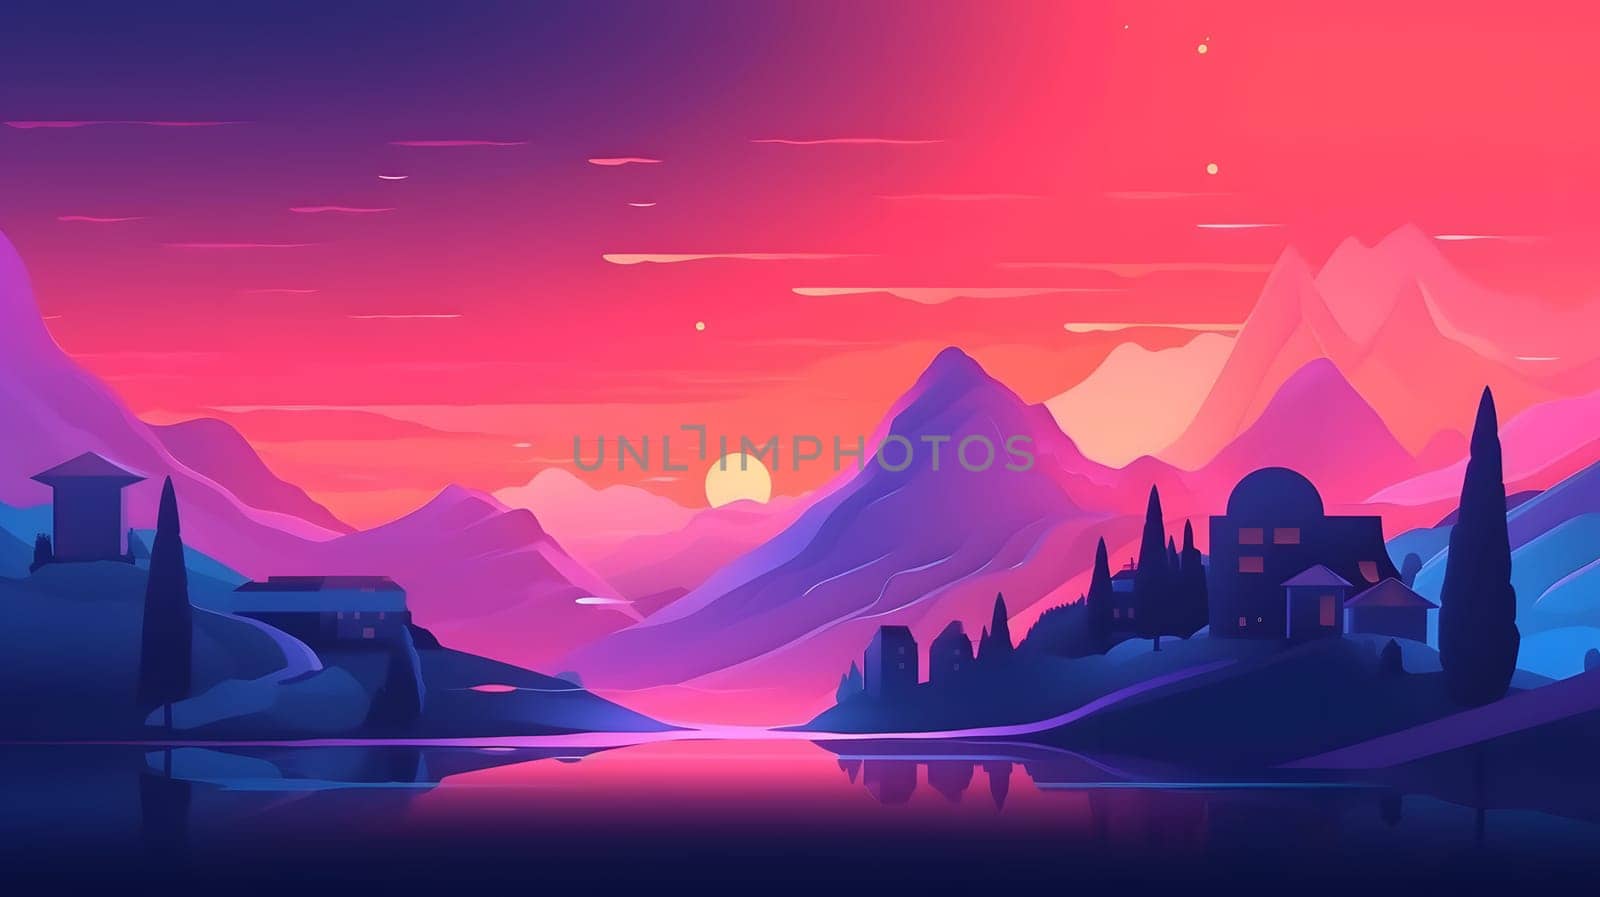 generic low-fi mediterranean synthvawe gradient sunset landscape in neon colors, neural network generated image by z1b